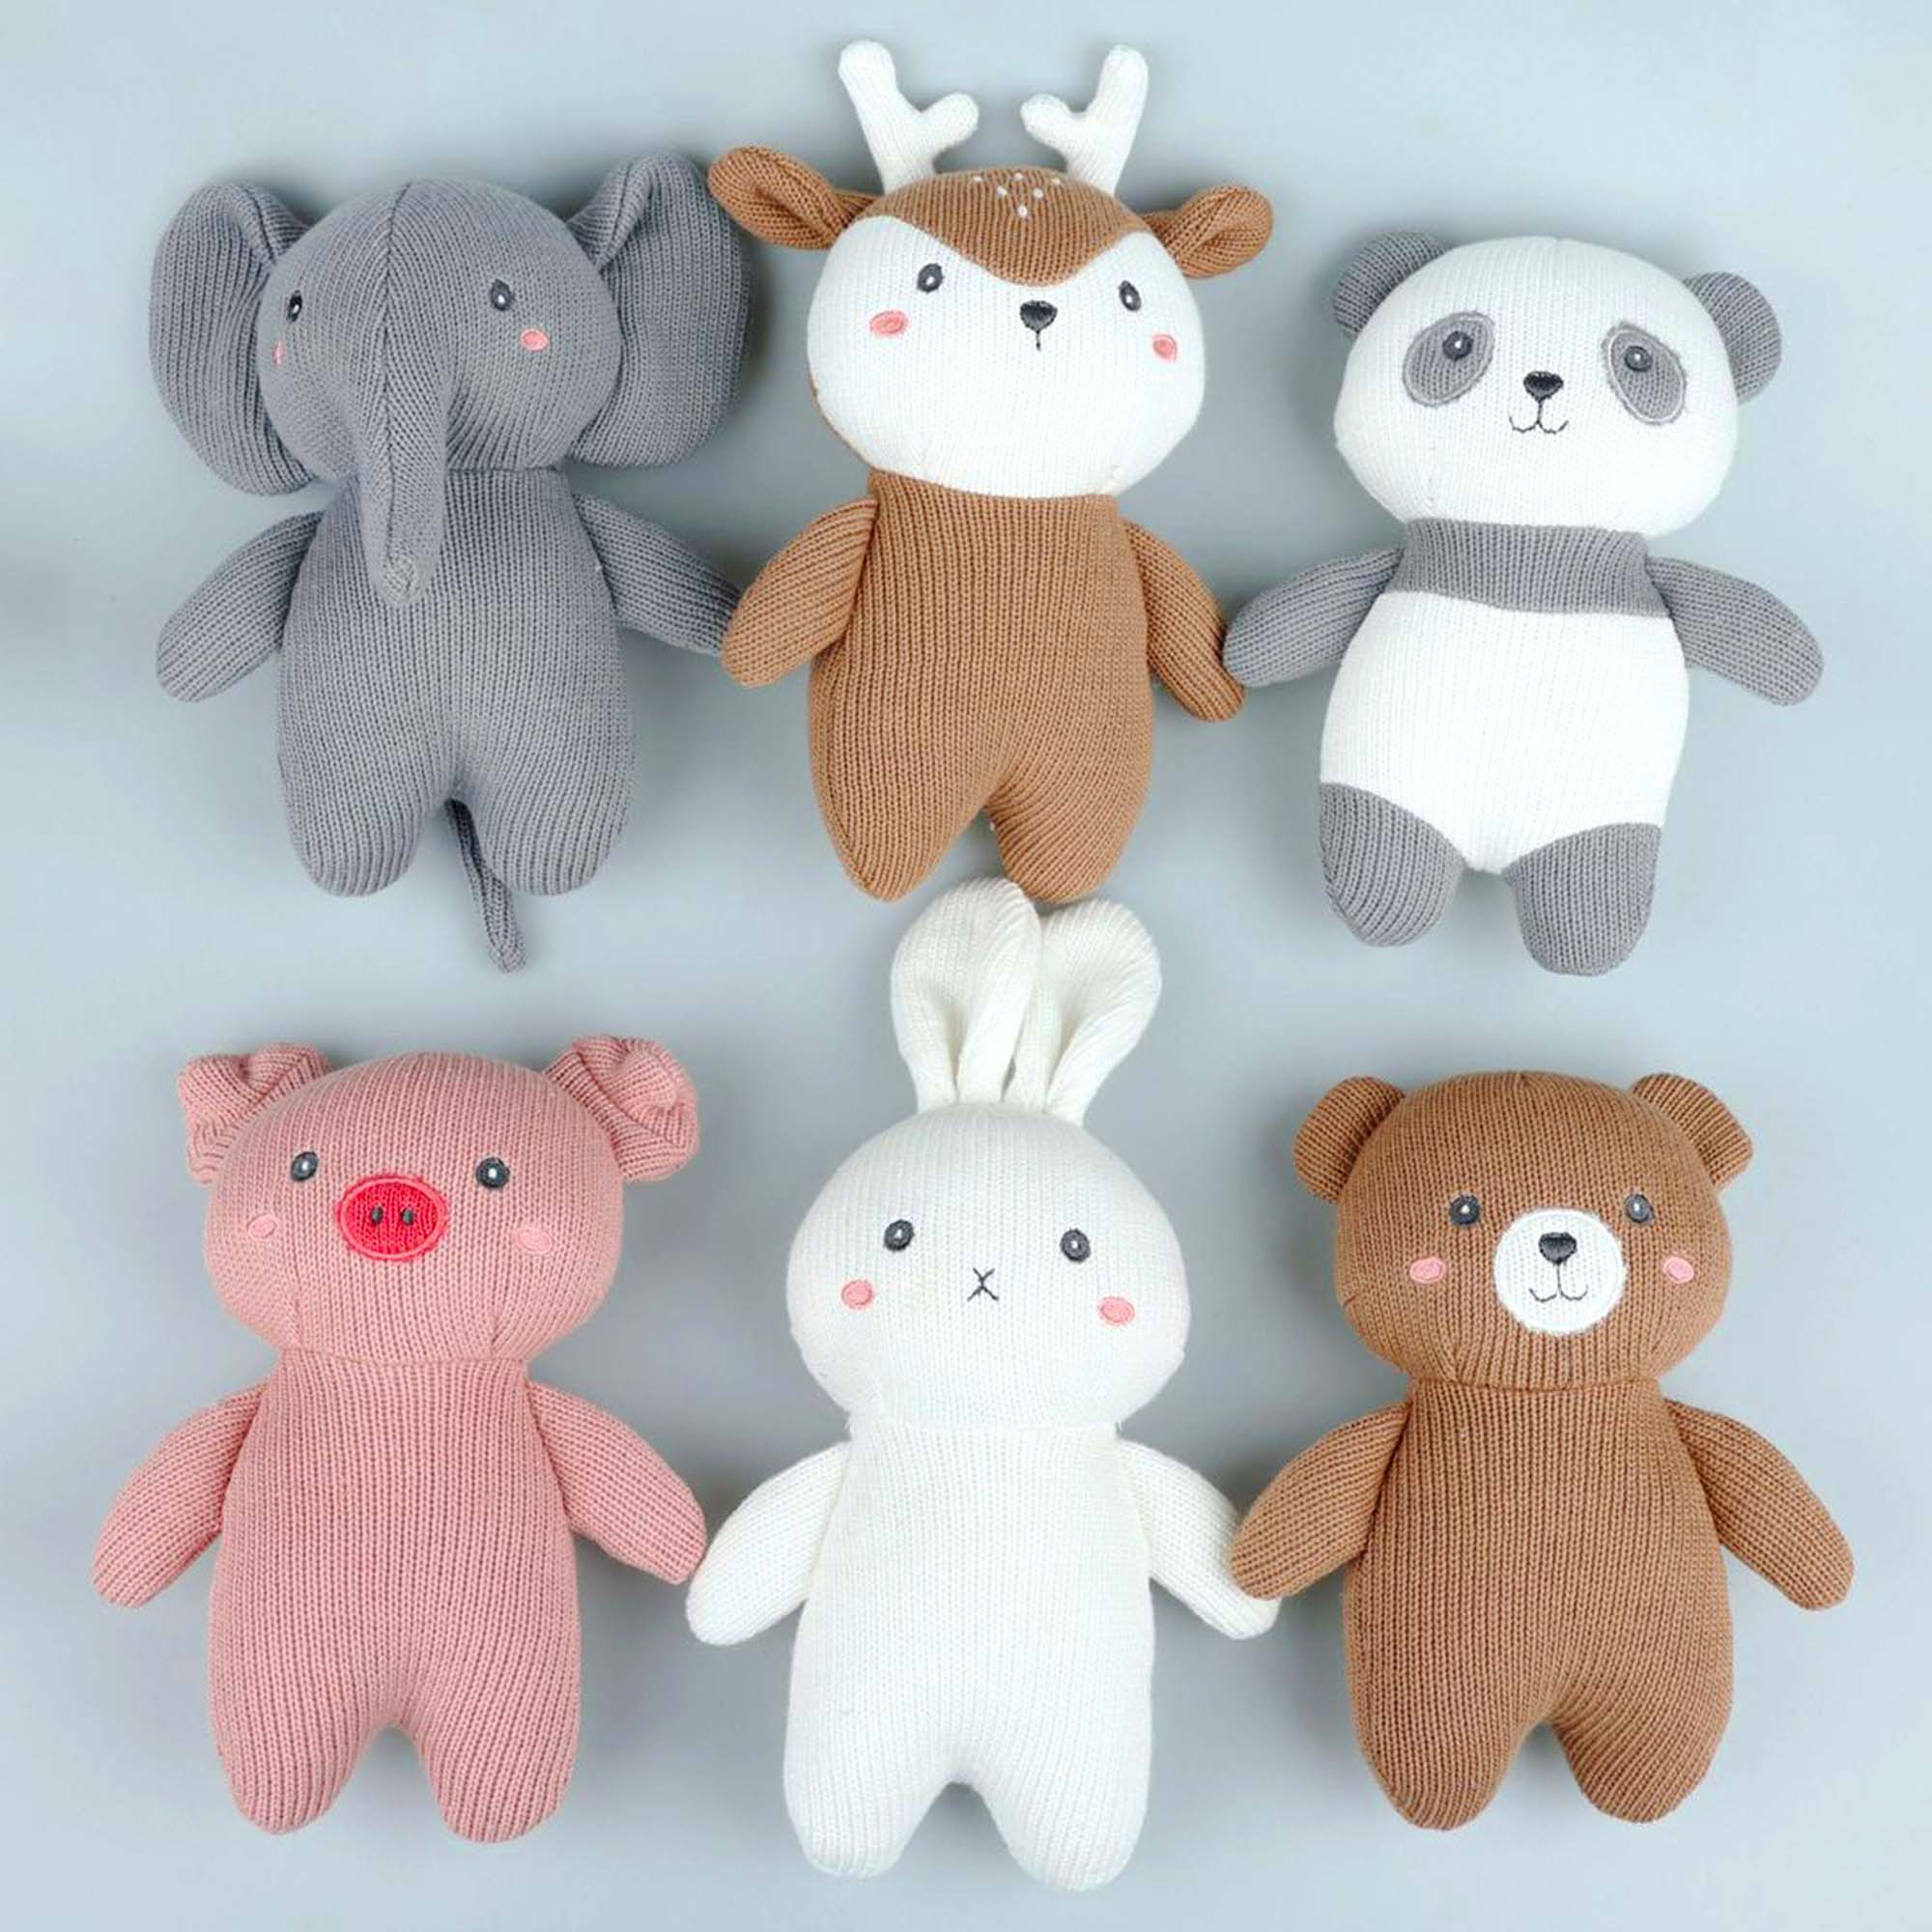 A group of knitted stuffed animals sit next to each other on a wooden table. The stuffed animals include a elephant, reindeer, panda, piggy, bunny and a bear. They are all made from colorful yarn.